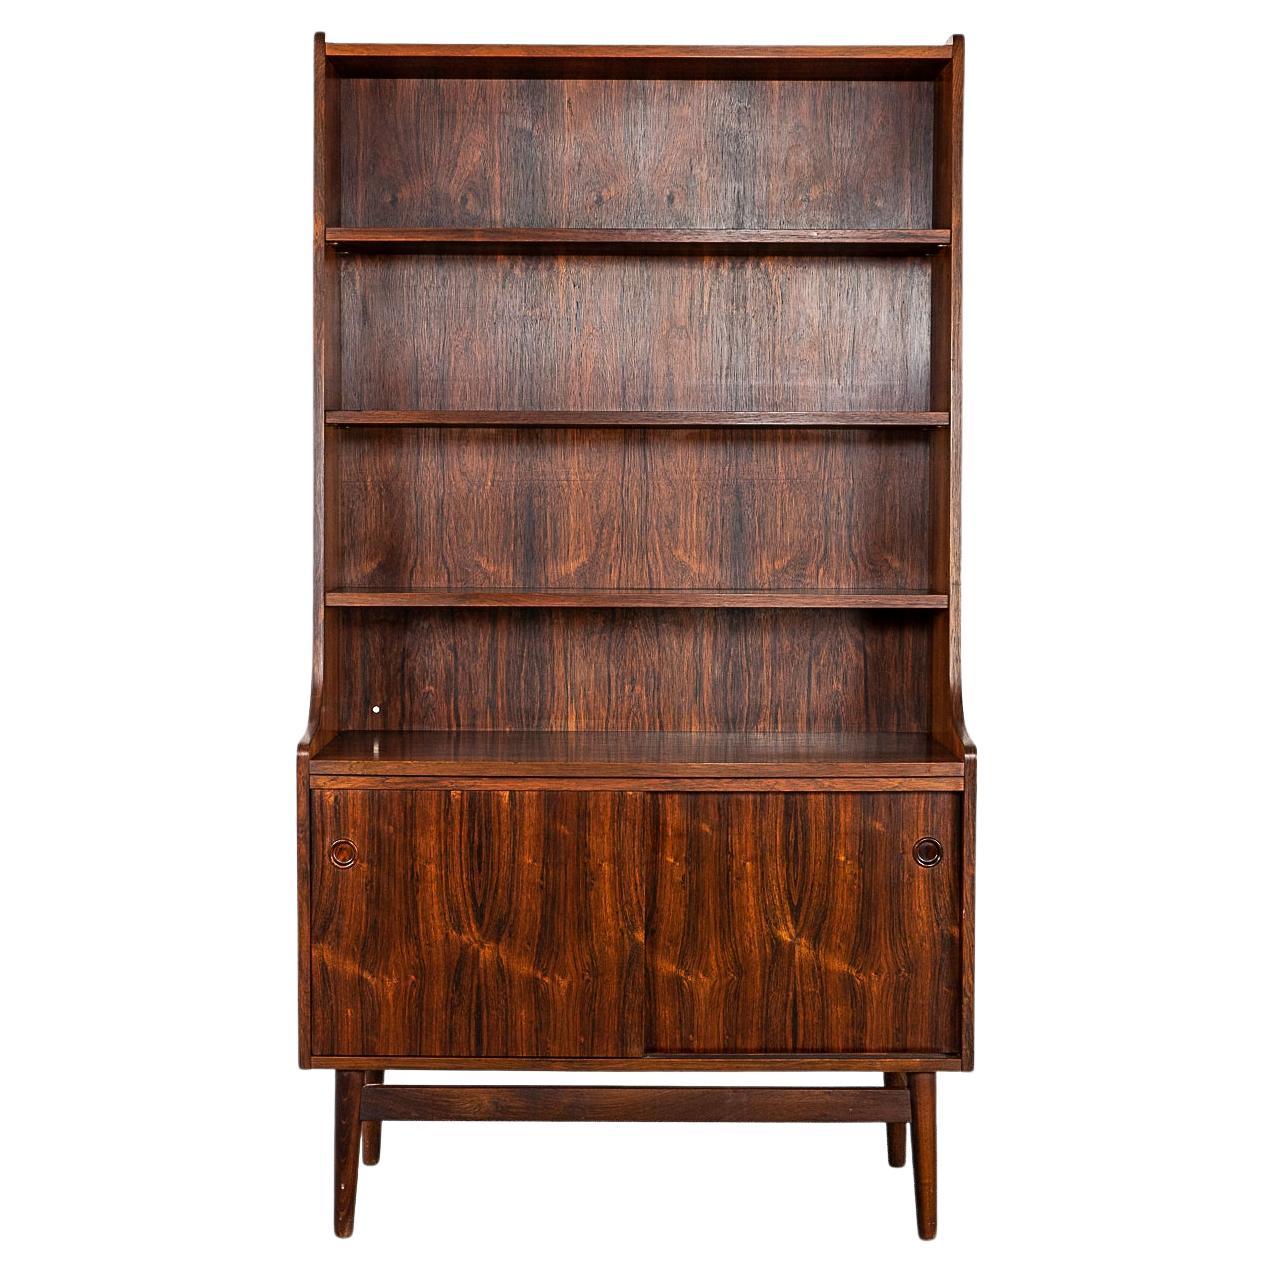 Danish Mid-Century Modern Rosewood Bookcase Cabinet by Johannes Sorth